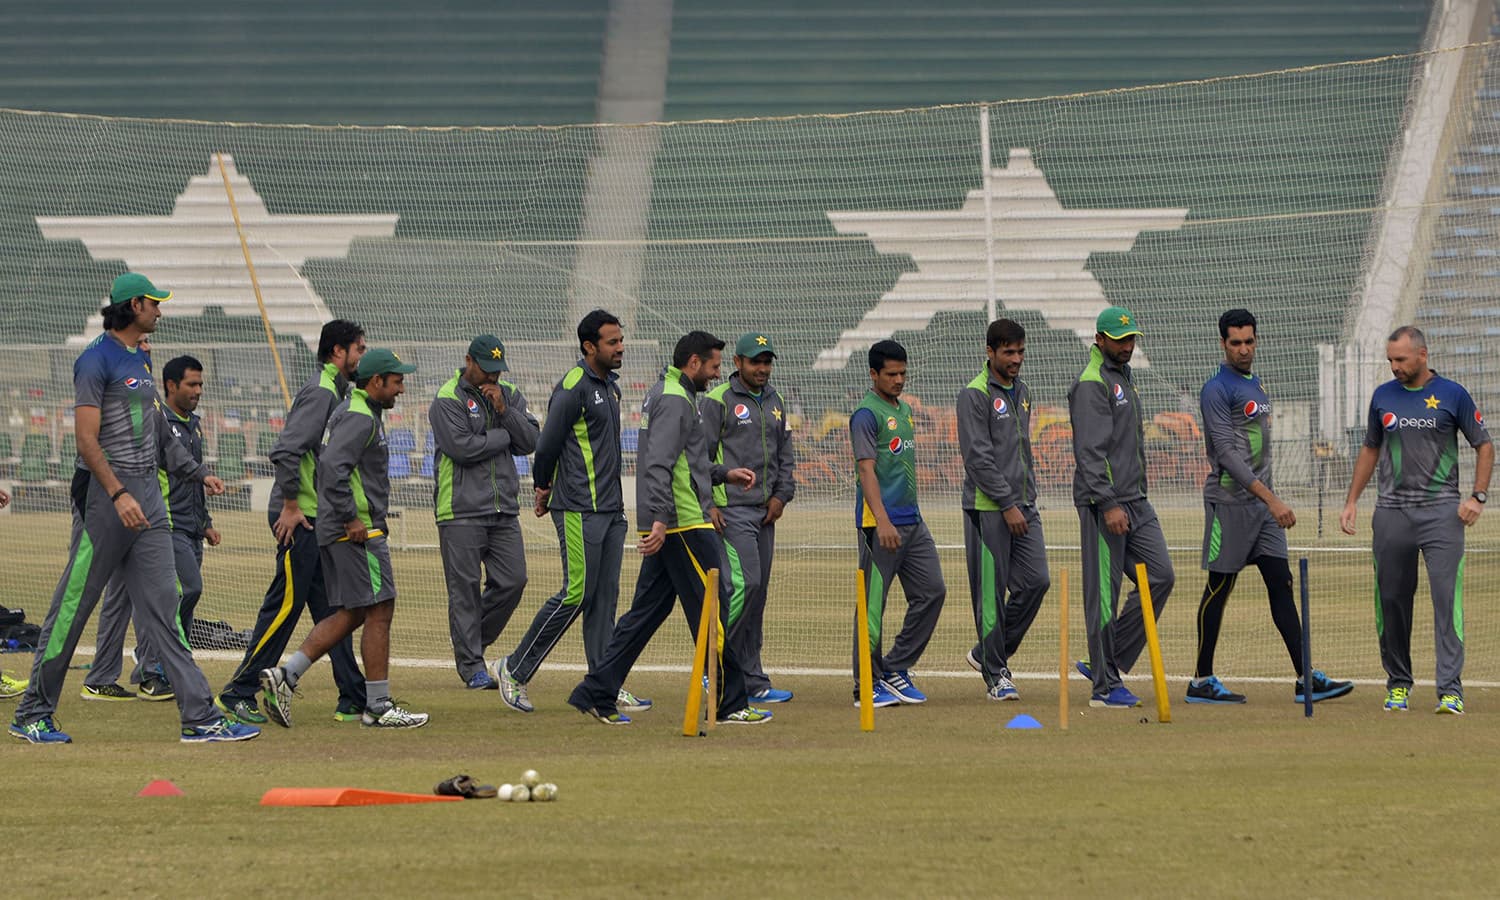 Pakistani cricketers practice during a camp for the Pakistan Super League (PSL) in Lahore on December 22, 2015. The first edition of the PSL Twenty20 league will be held in Dubai and Sharjah from February 4. Five teams from Karachi, Islamabad, Quetta, Lahore and Peshawar will compete in the league, designed on the lines of the Indian Premier League and Australia's Big Bash. AFP PHOTO / Arif ALI